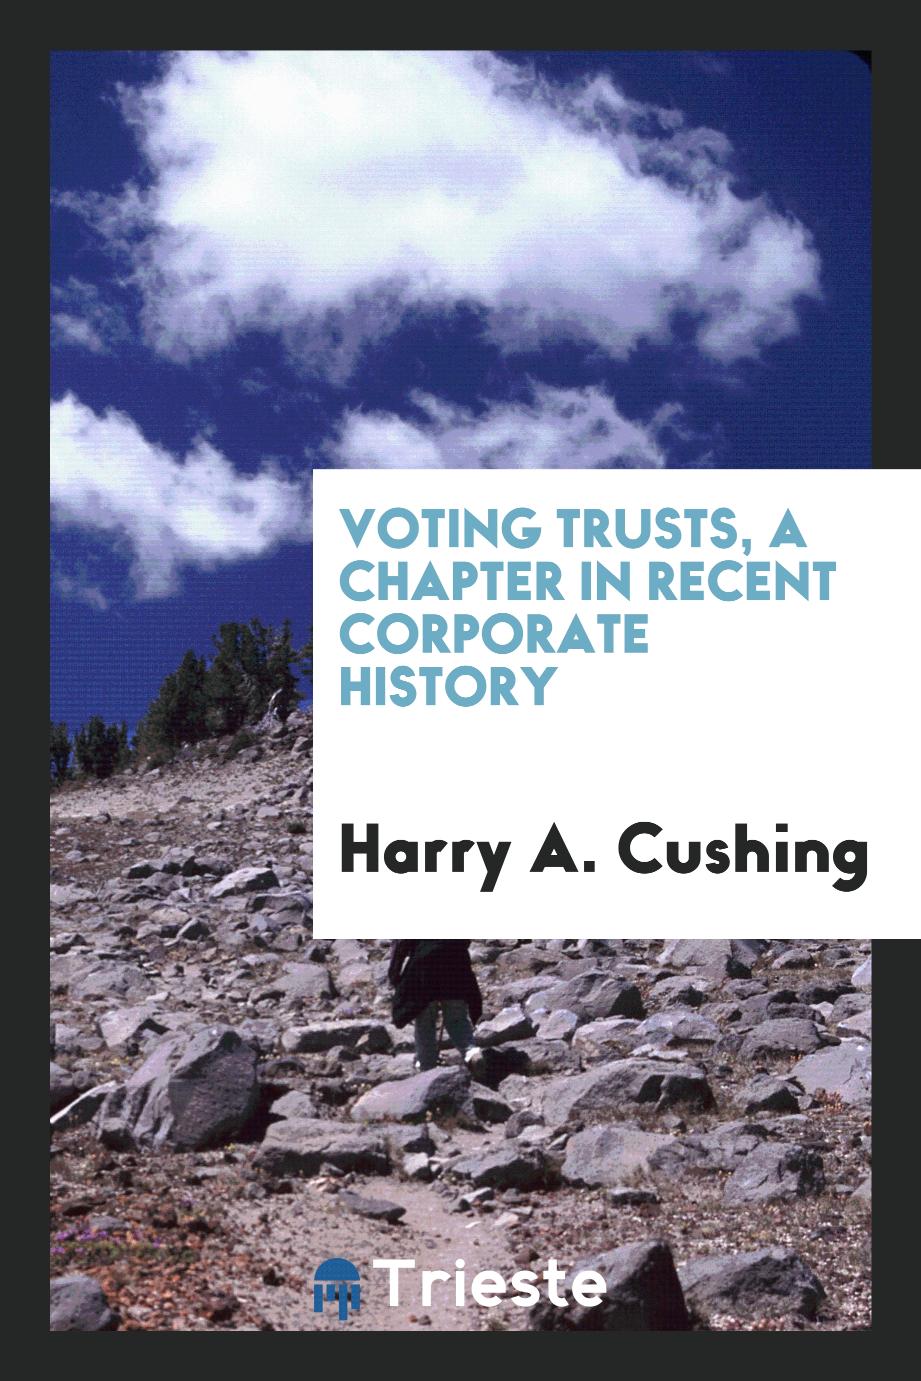 Voting trusts, a chapter in recent corporate history